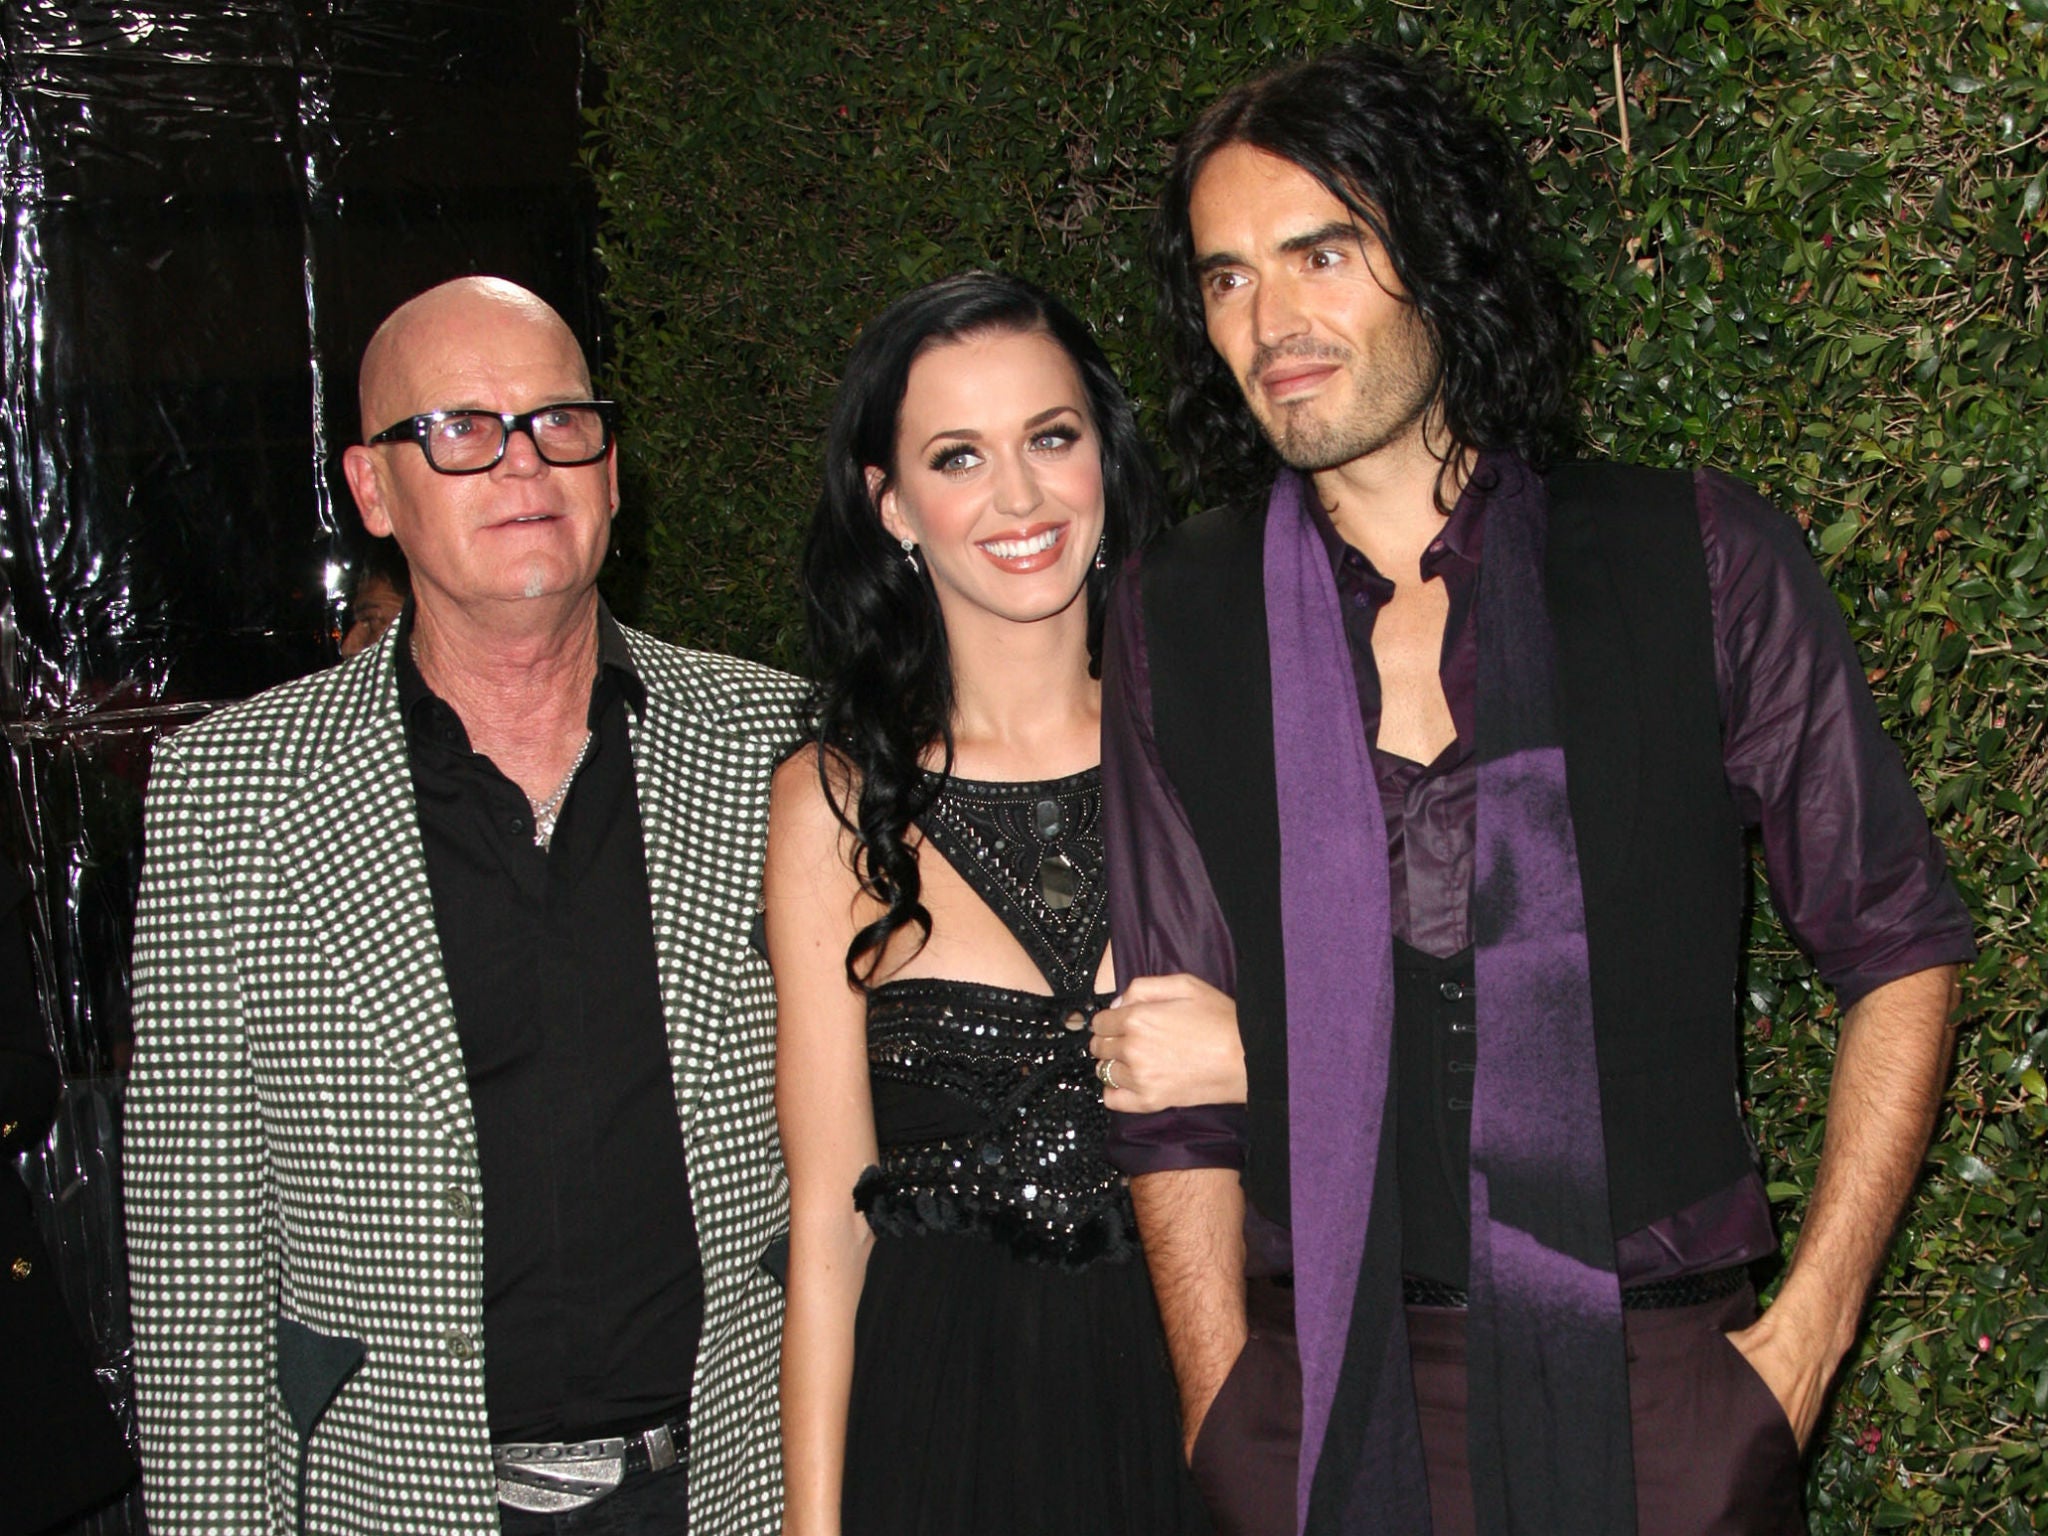 Perry with her father and ex-husband Russell Brand in 2011